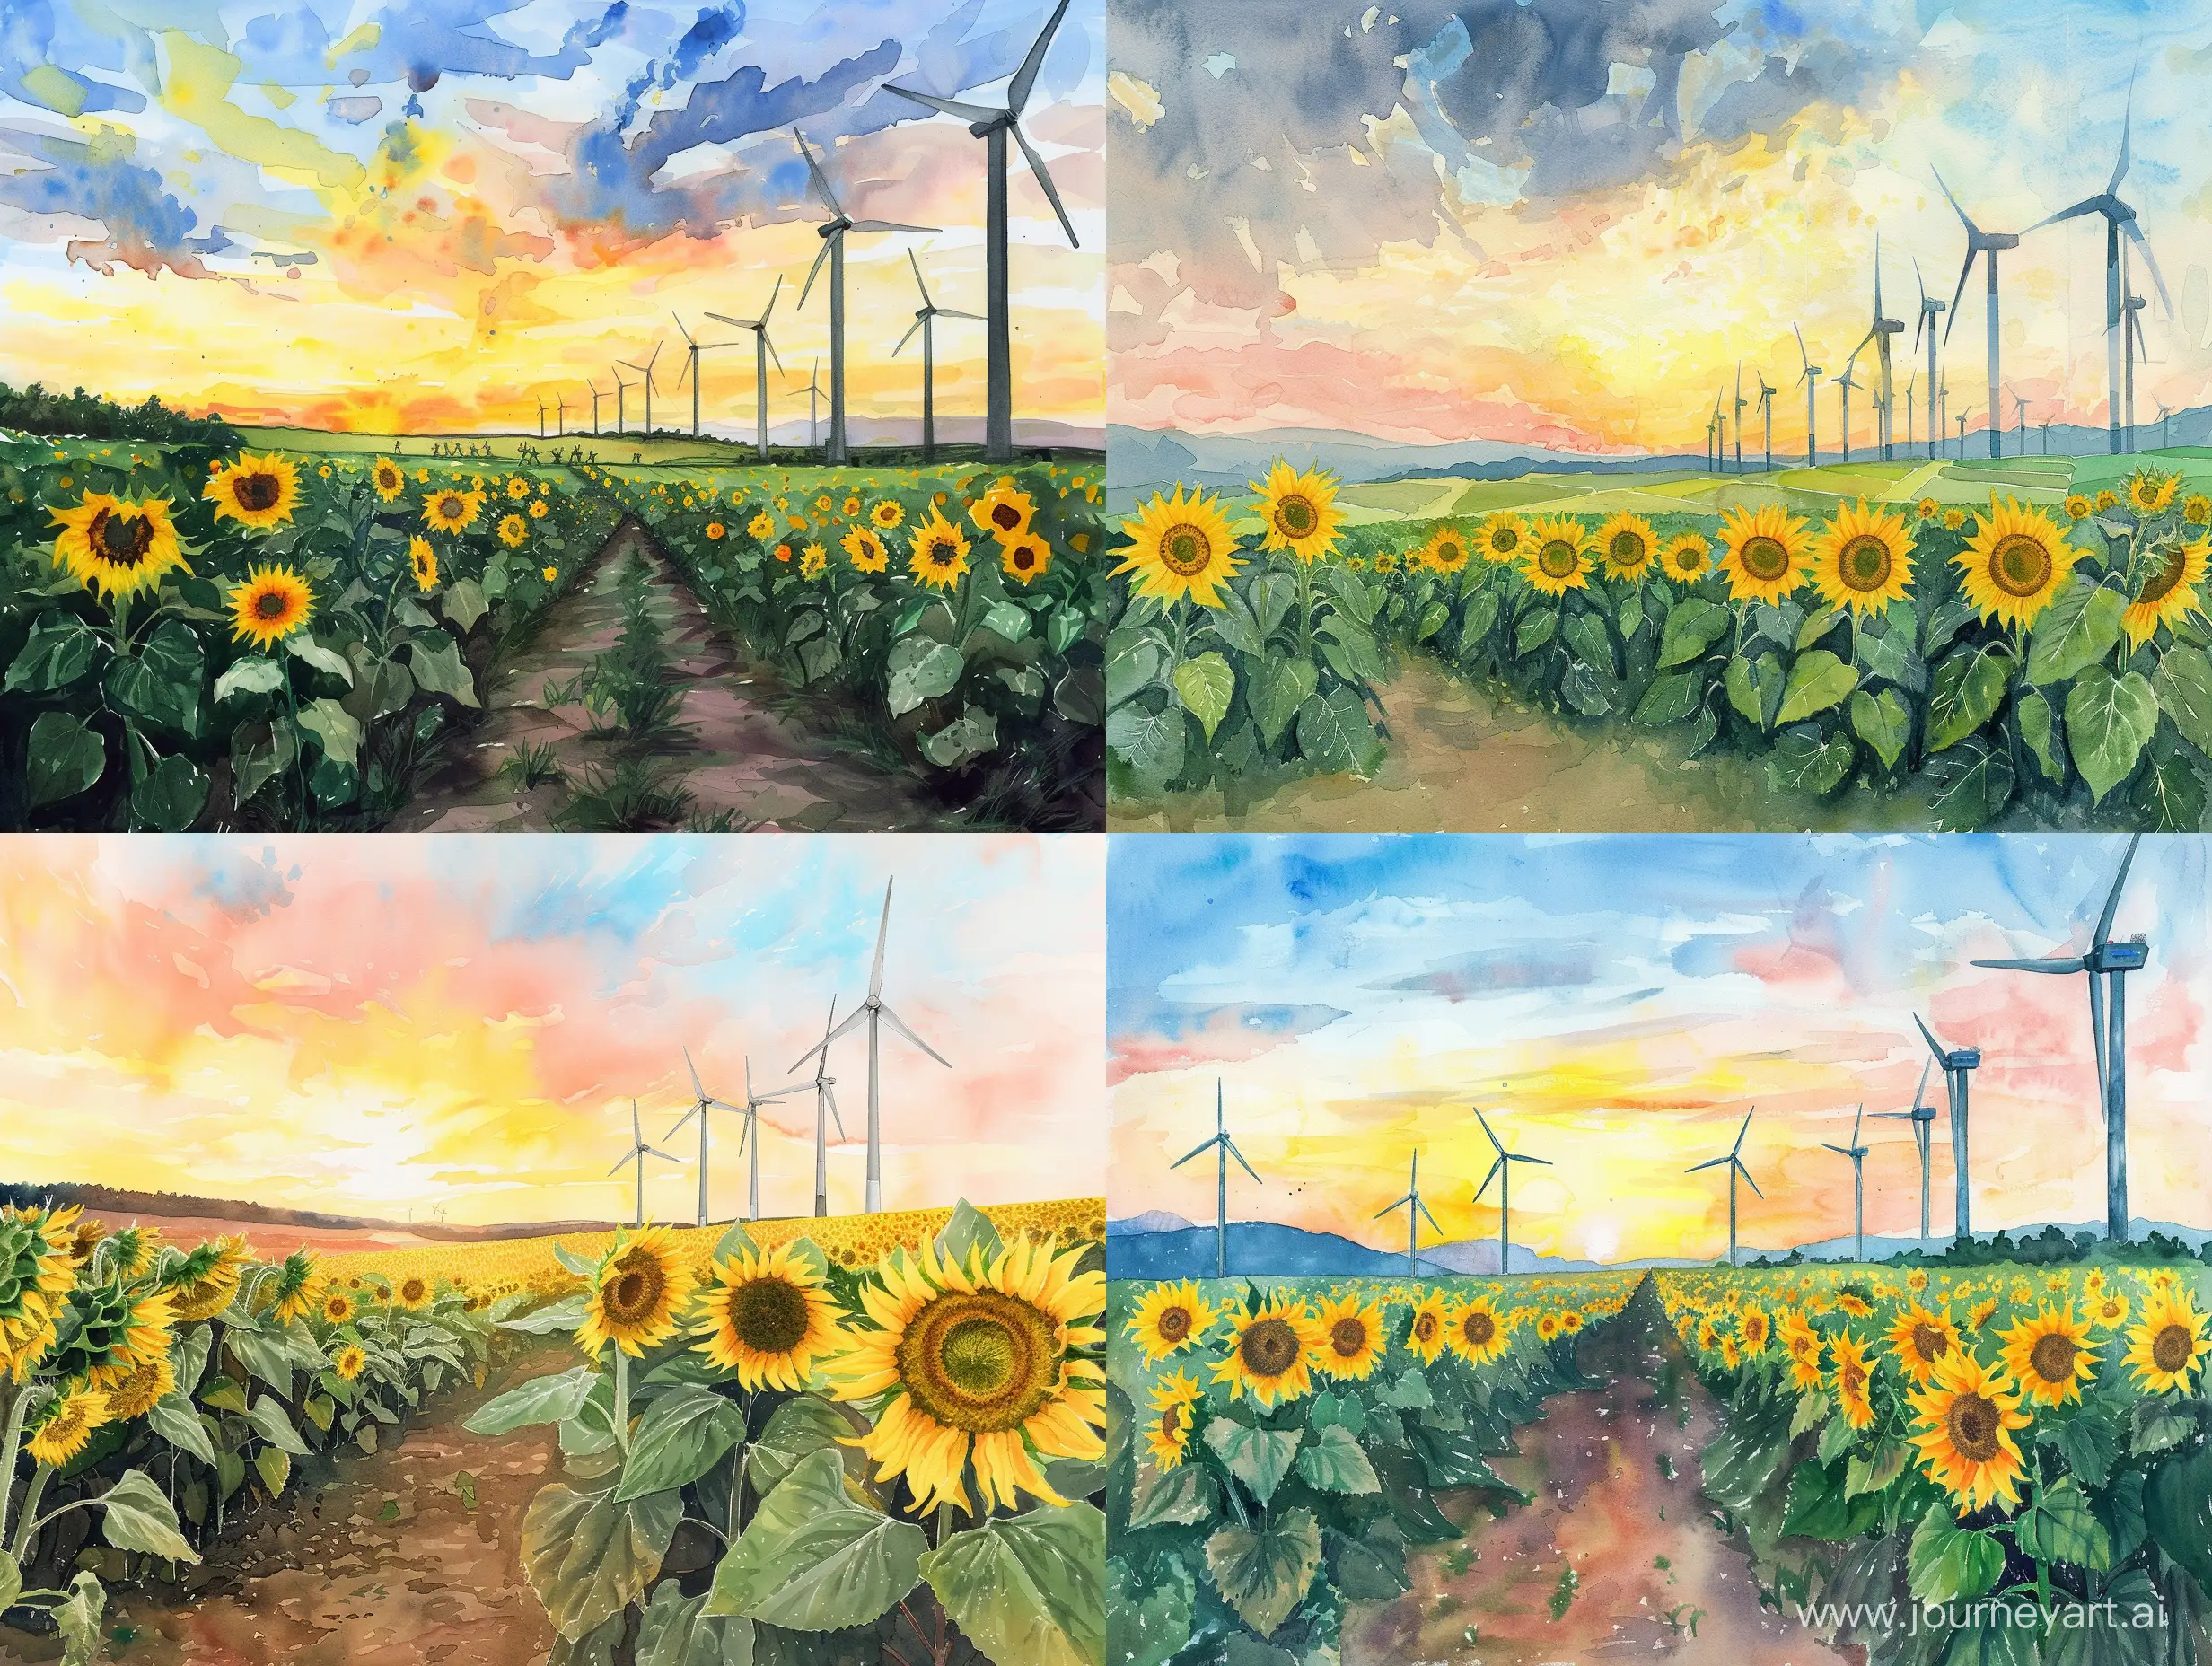 Sunflower-Field-with-Wind-Turbines-under-a-Cloudless-Sunset-Sky-Watercolor-Style-by-Nicholas-Roerich